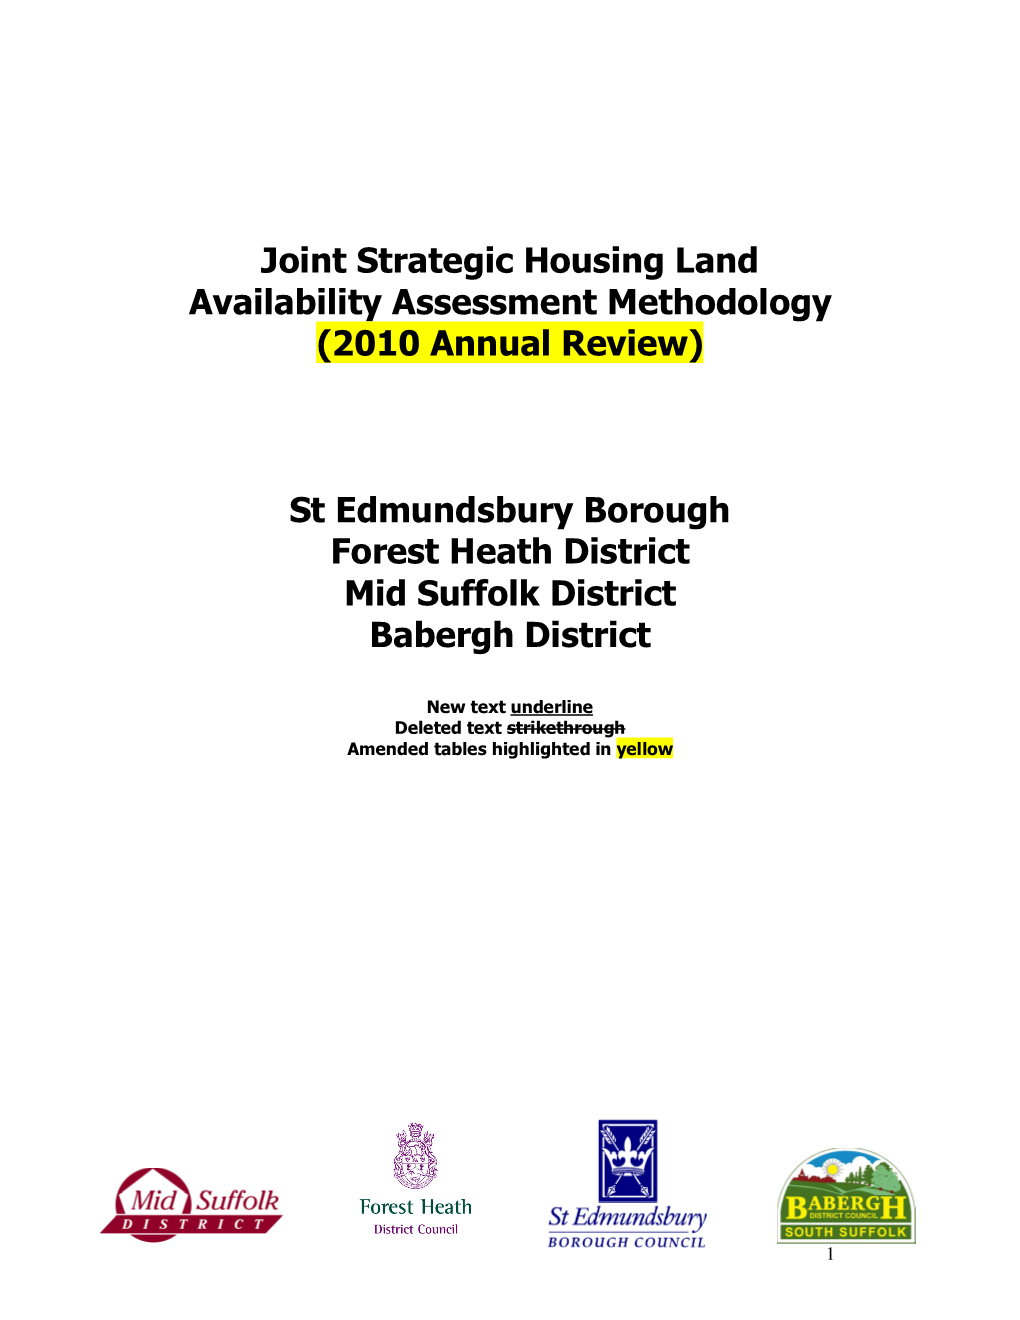 2010 Annual Review)